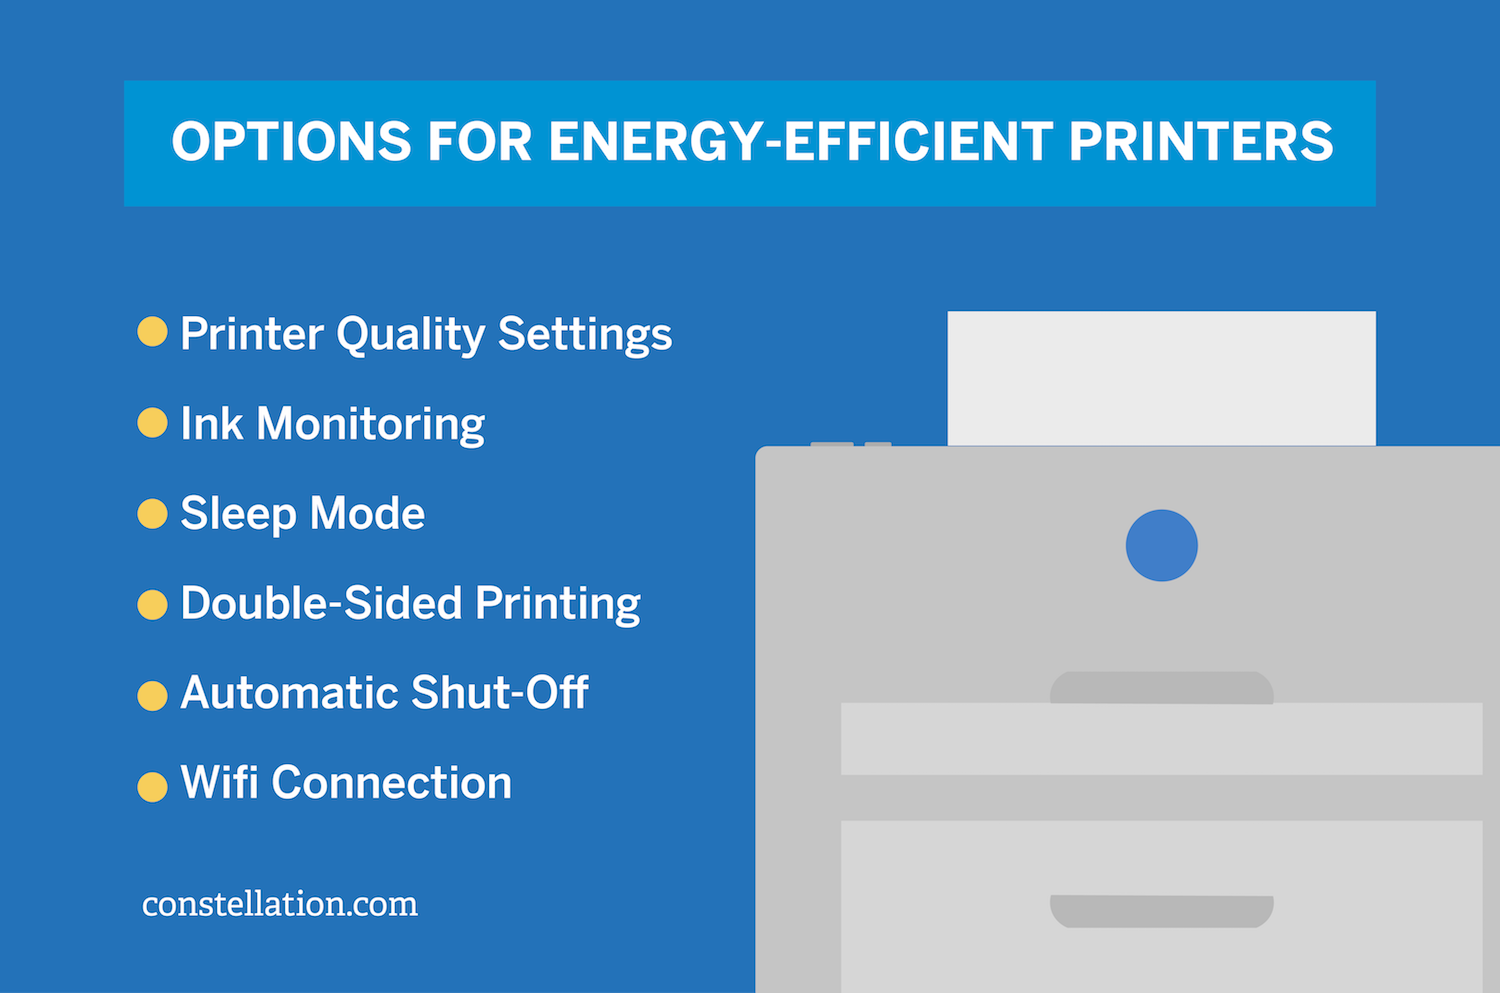 List of options for energy-efficient printers